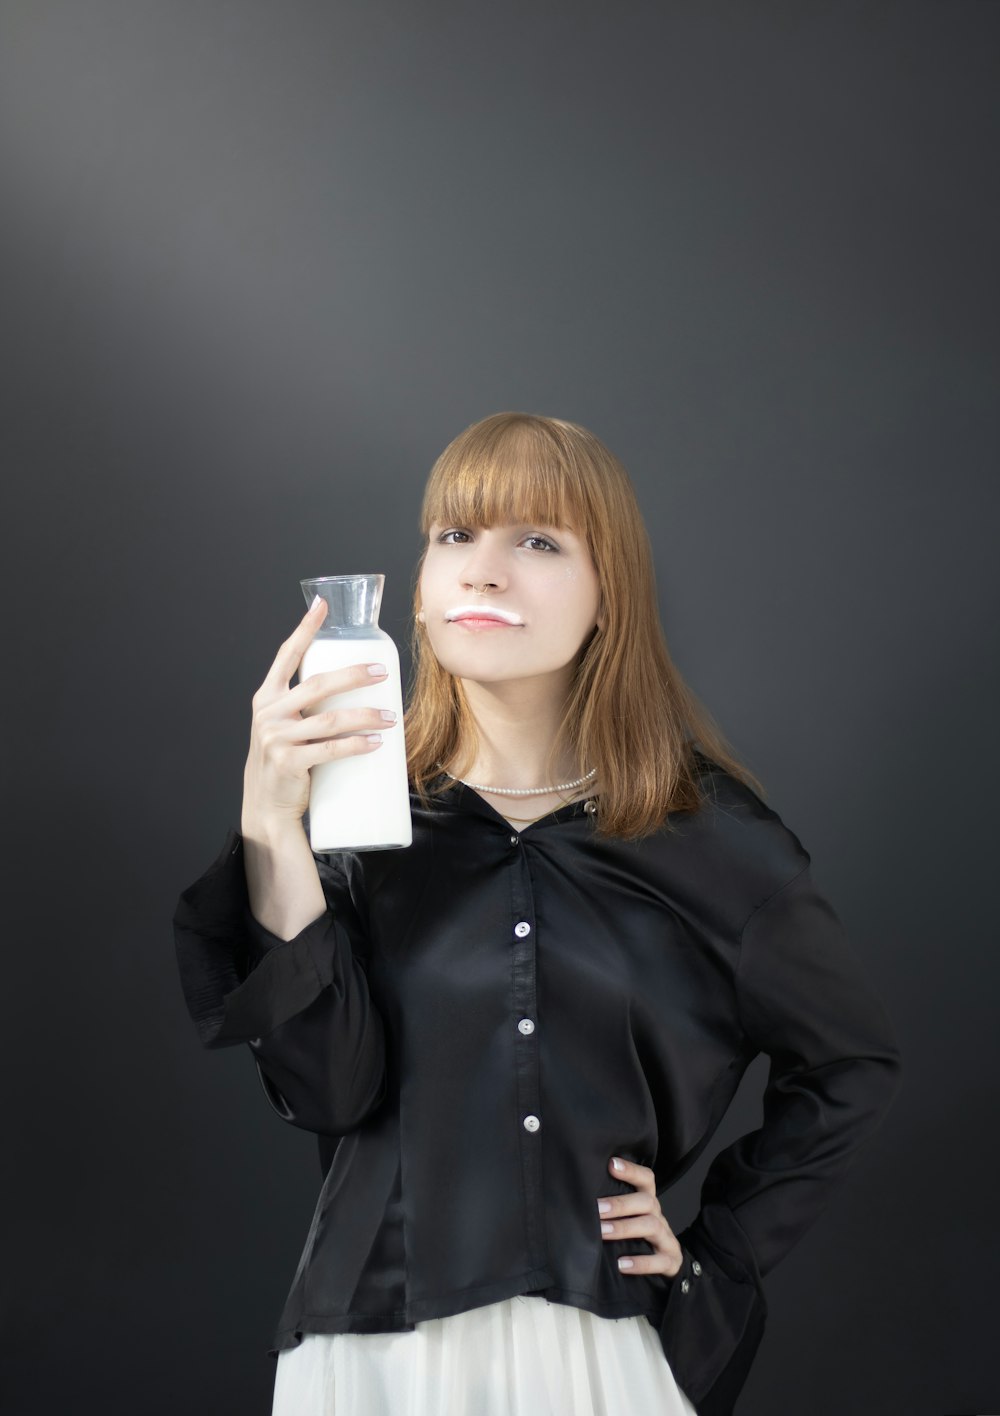 a woman holding a glass and a bottle of milk